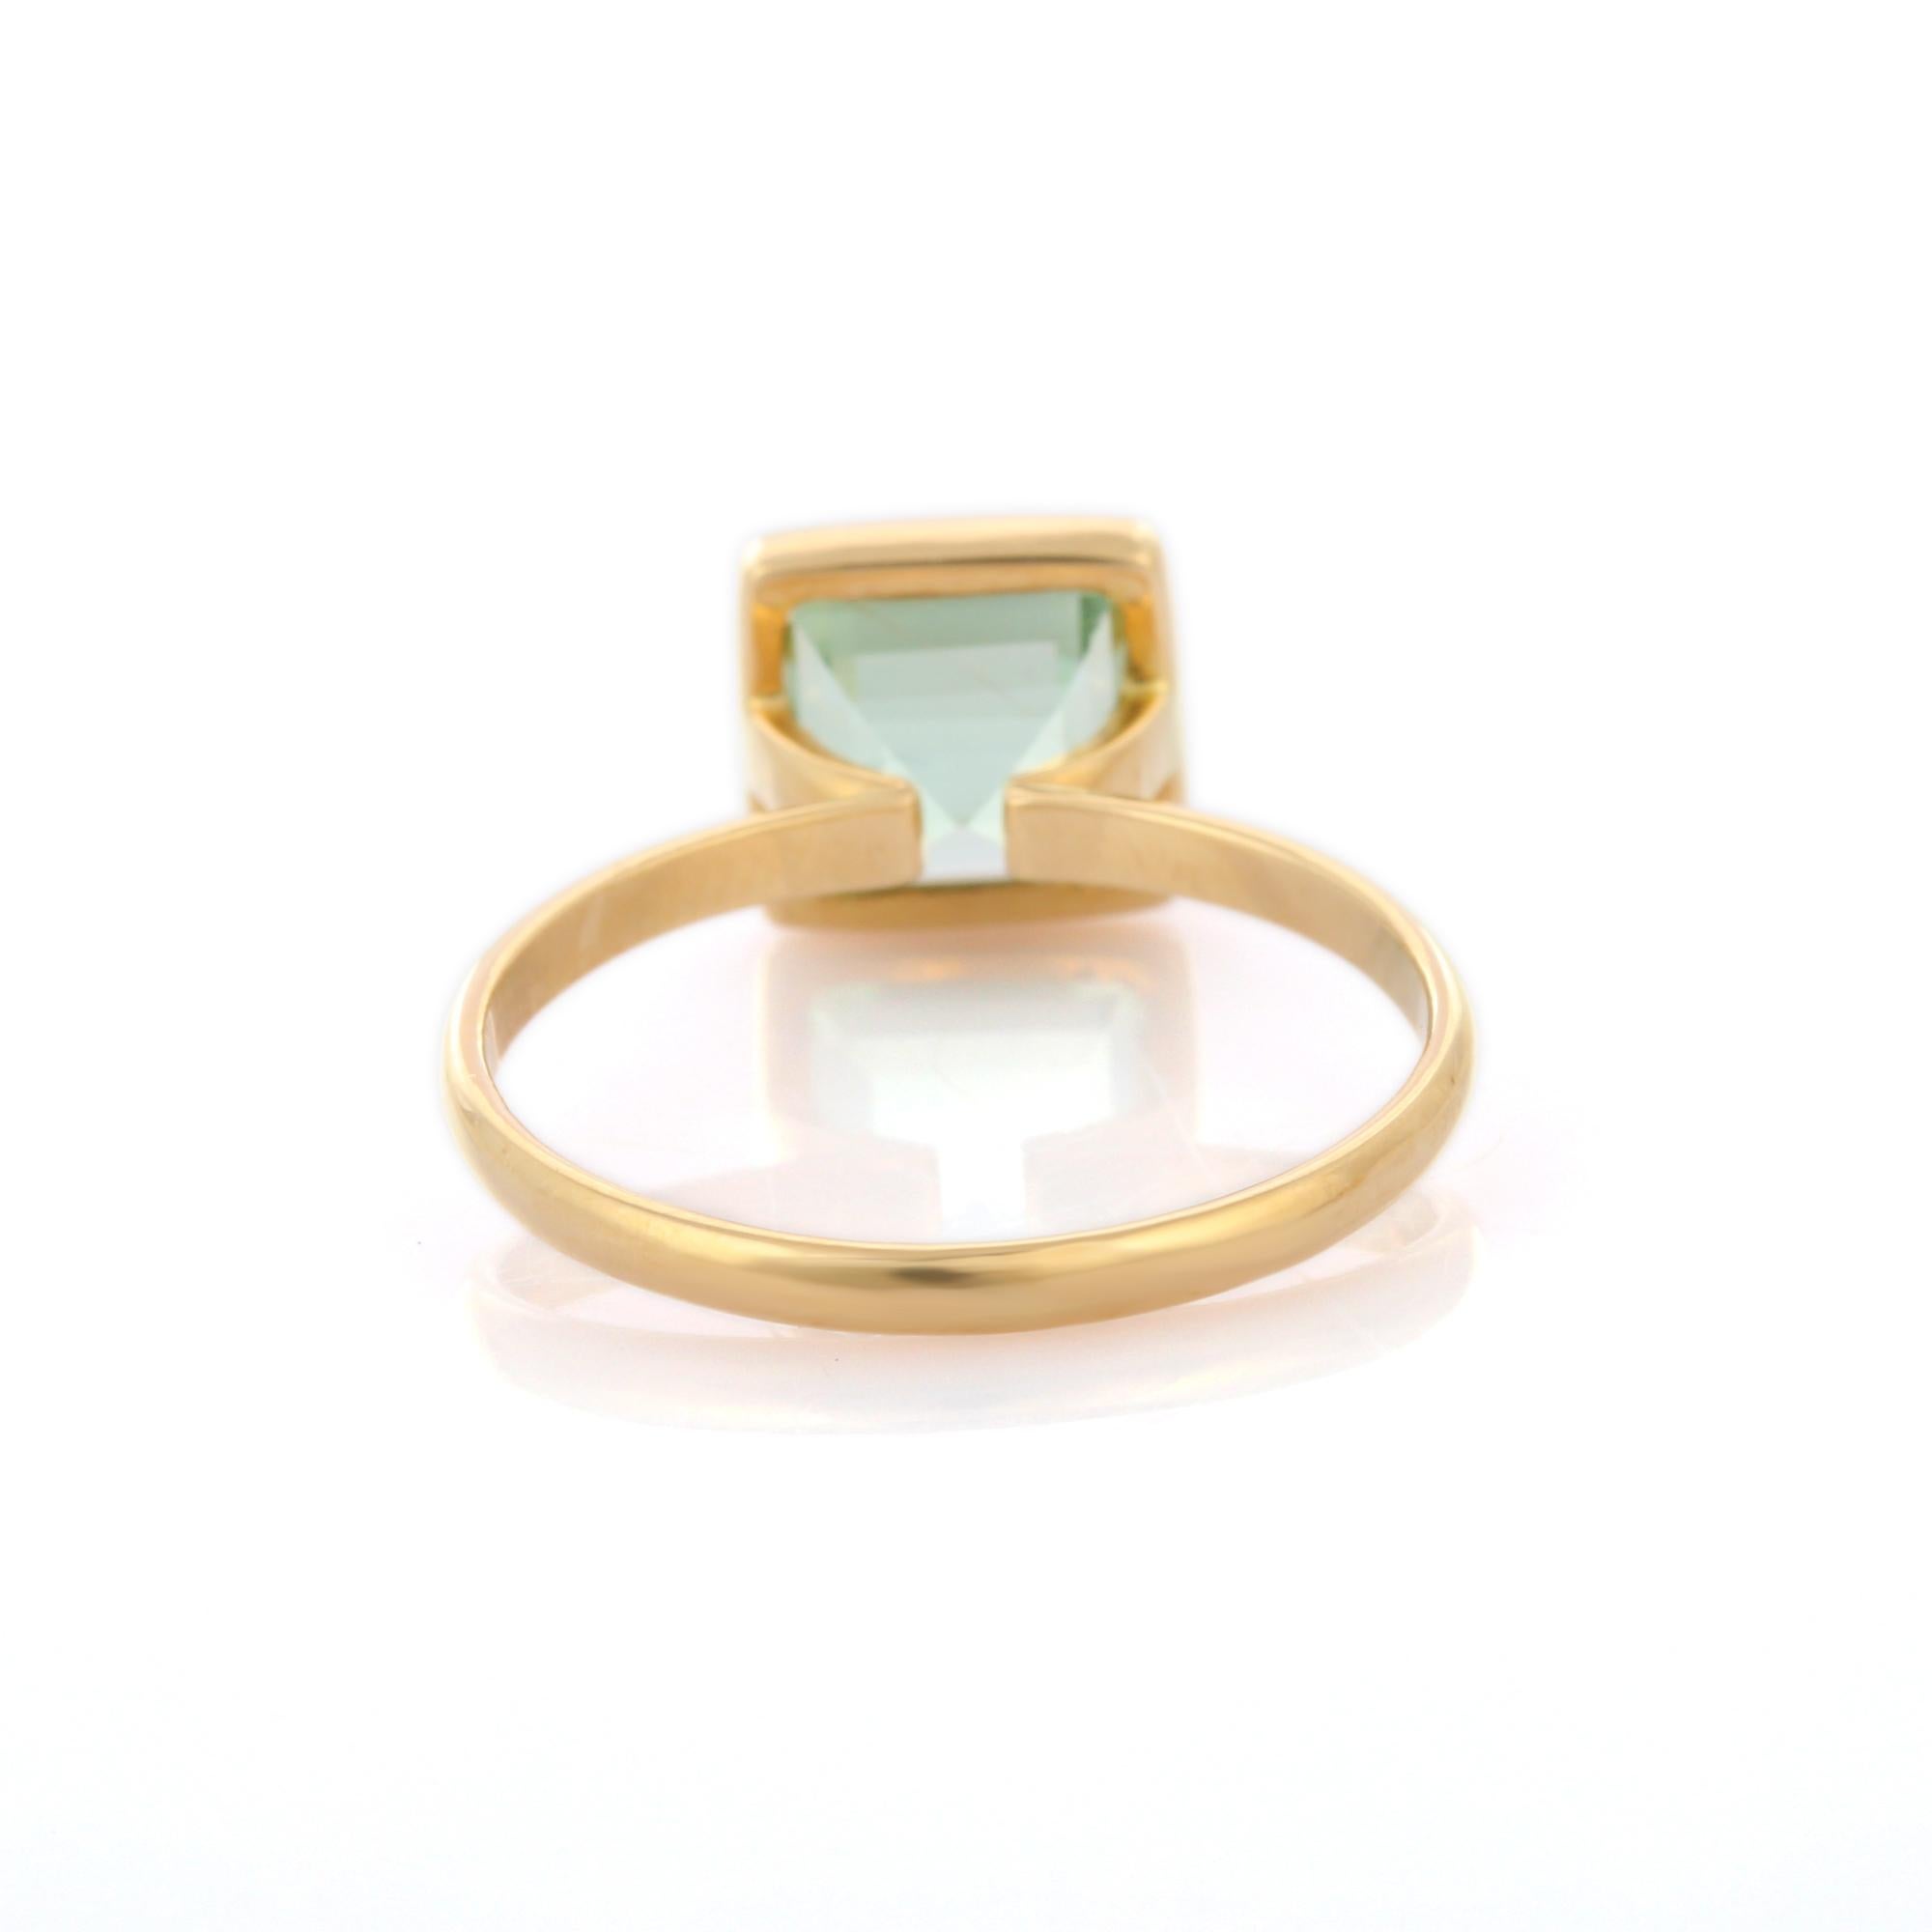 For Sale:  Natural Aquamarine Square Cut Gemstone Ring in 18K Yellow Gold 7